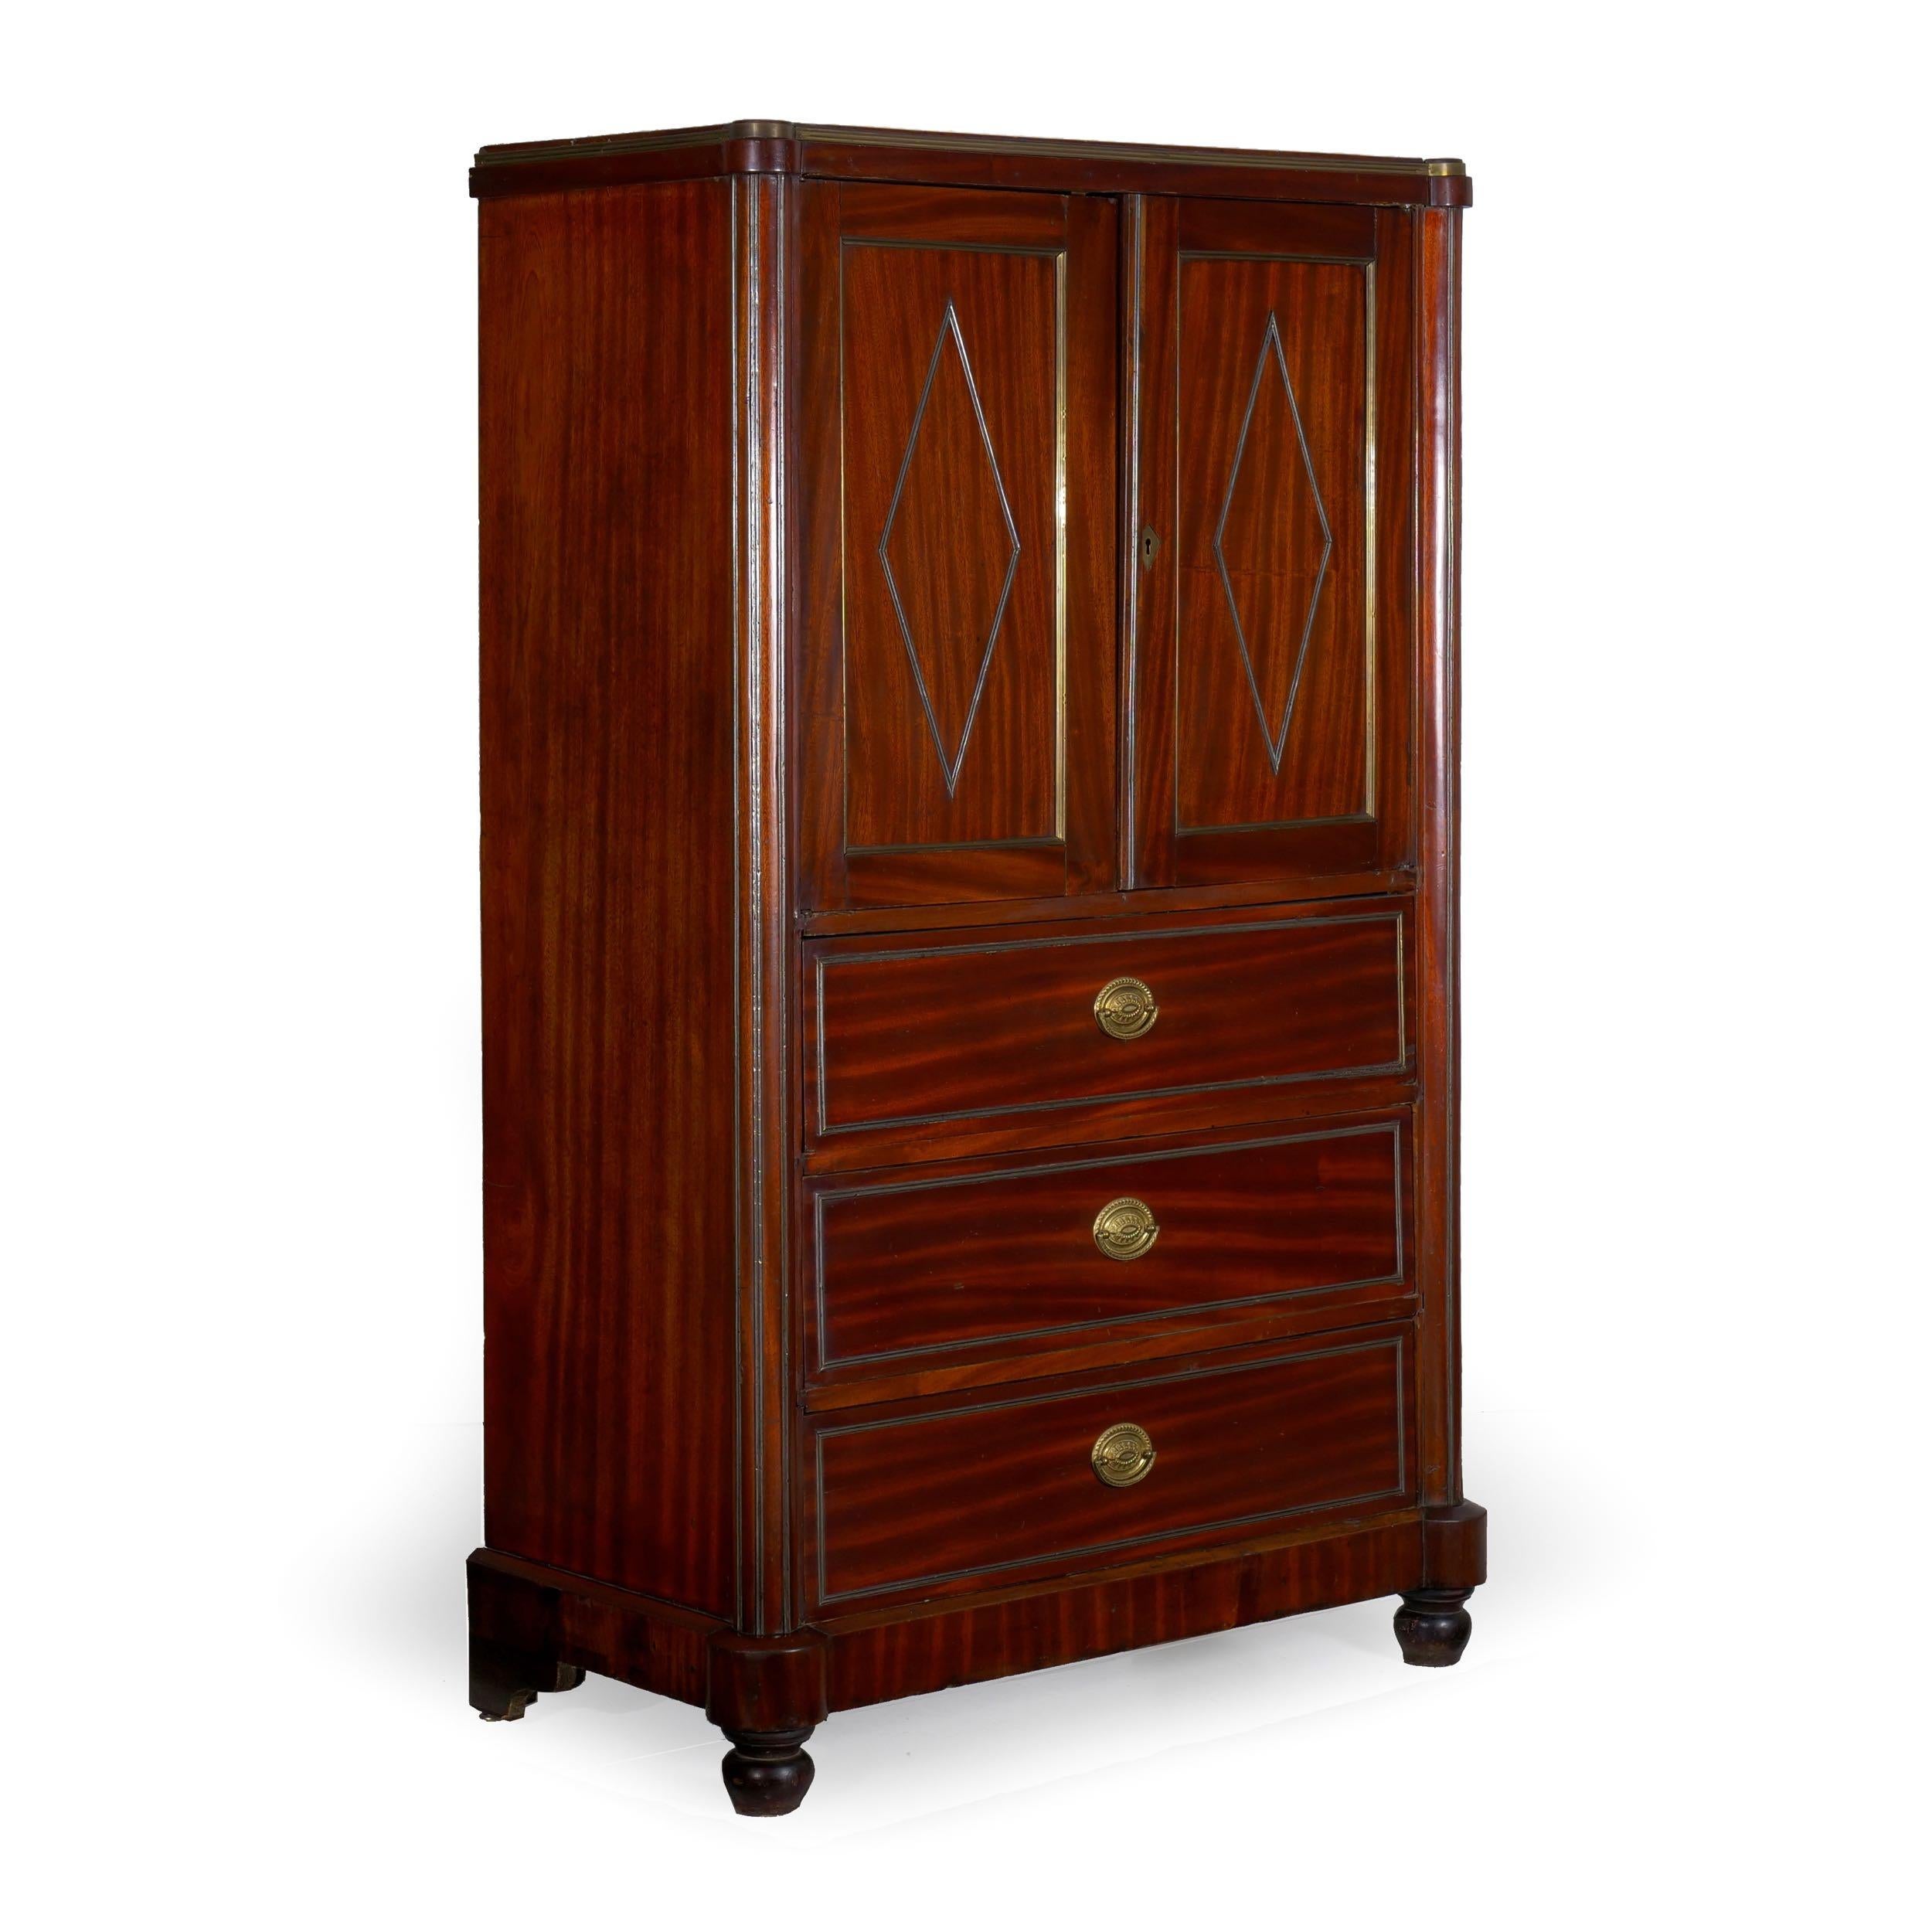 An interesting cabinet with a dense Cuban mahogany veneer, the armoire is likely of Russian origin in light of the early latch hardware in the left door marked with cold-stamped Cyrillic.

The open cabinet is situated over three drawers, each hand